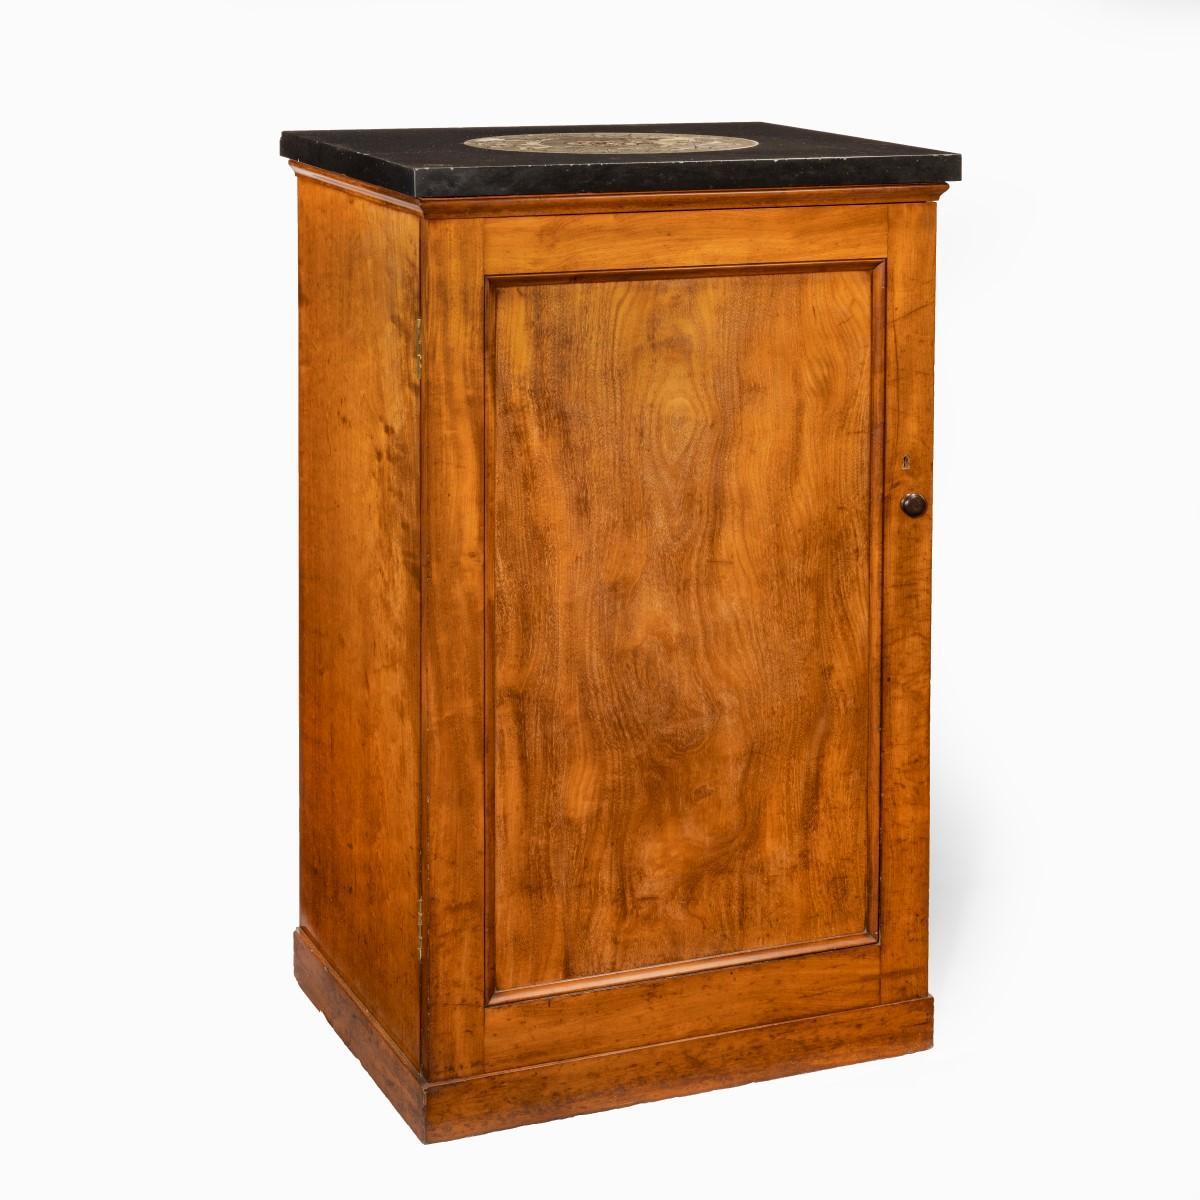 A Victorian mahogany collector’s cabinet with a fossil marble top, of rectangular form with a single panelled door opening to reveal 13 drawers, the black marble top set with a large central nautiloid, with the original key. English, circa